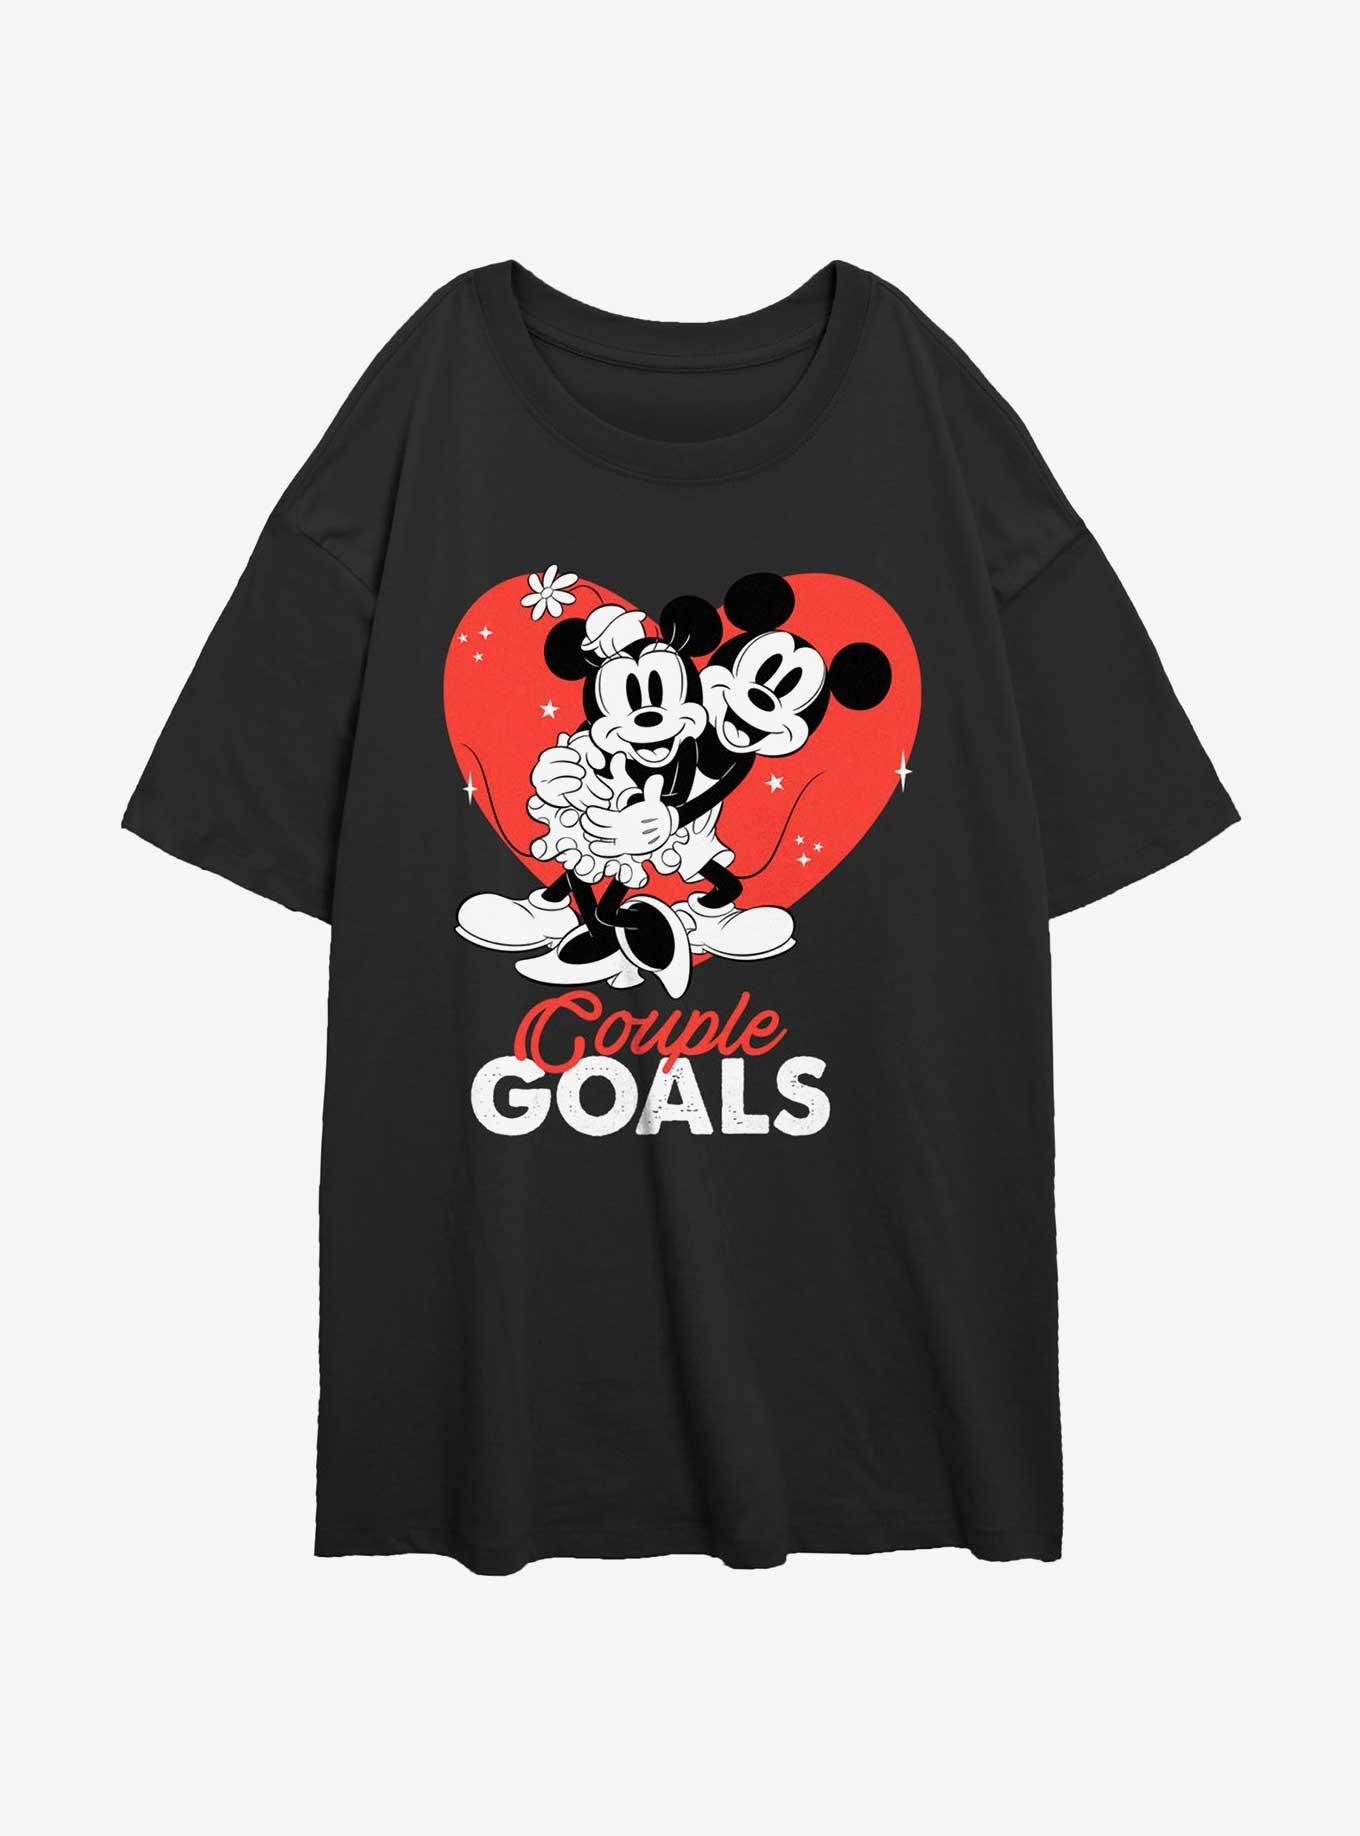 Disney Mickey Mouse & Minnie Mouse Couple Goals Girls Oversized T-Shirt, BLACK, hi-res